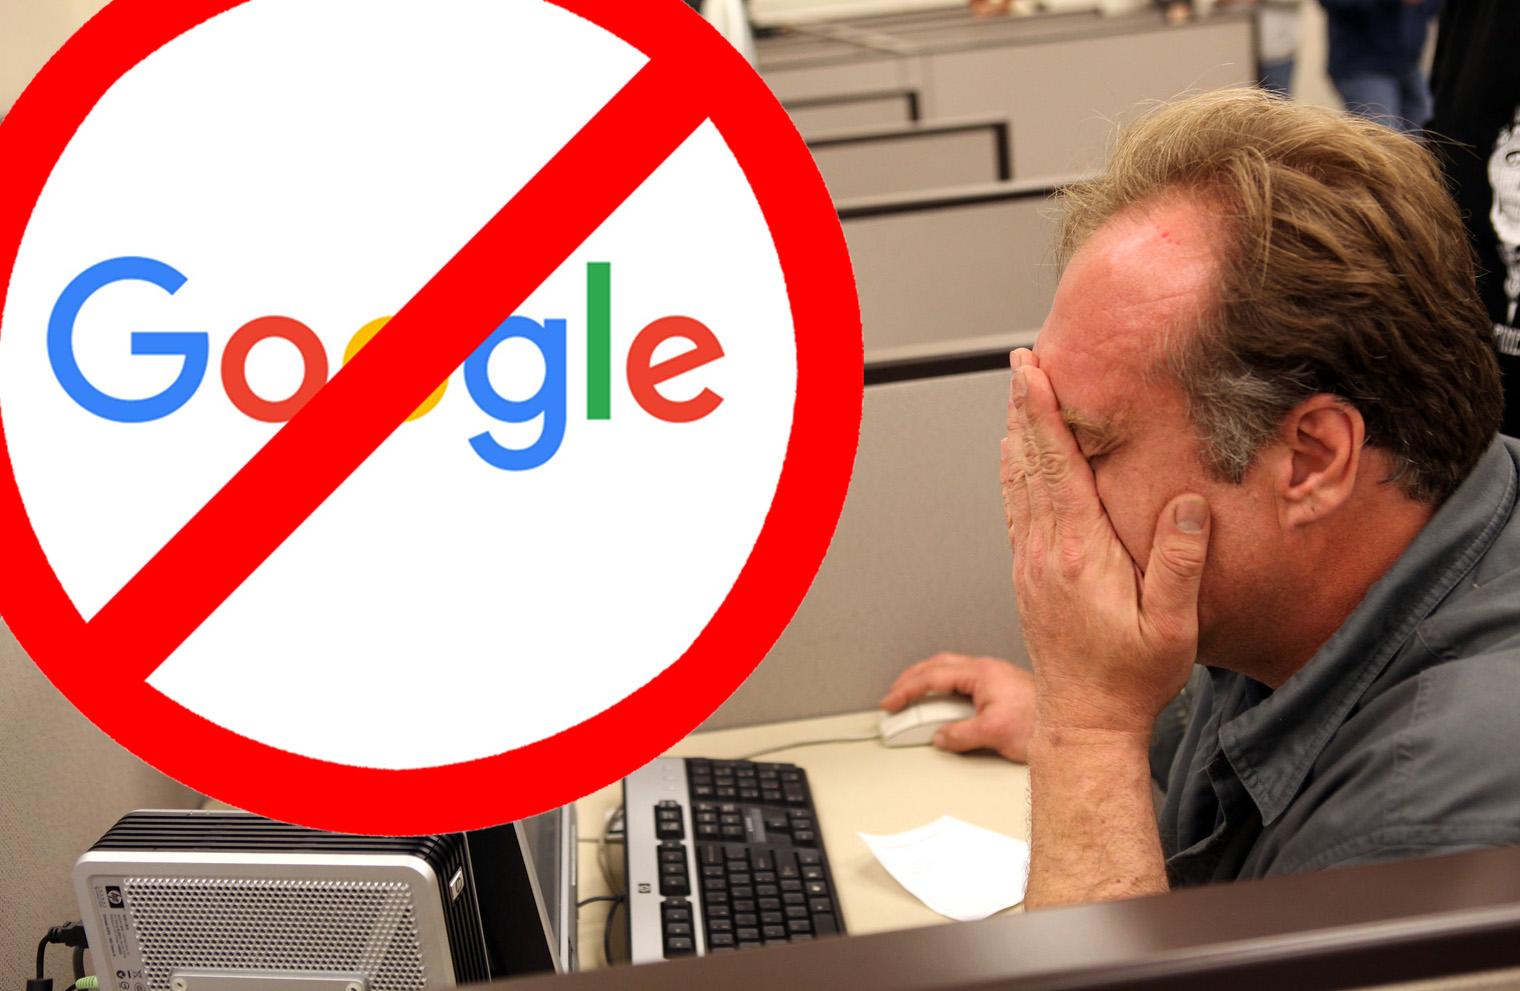 Nine Things You Should Never Search For On Google According To Reddit Indy100 Indy100